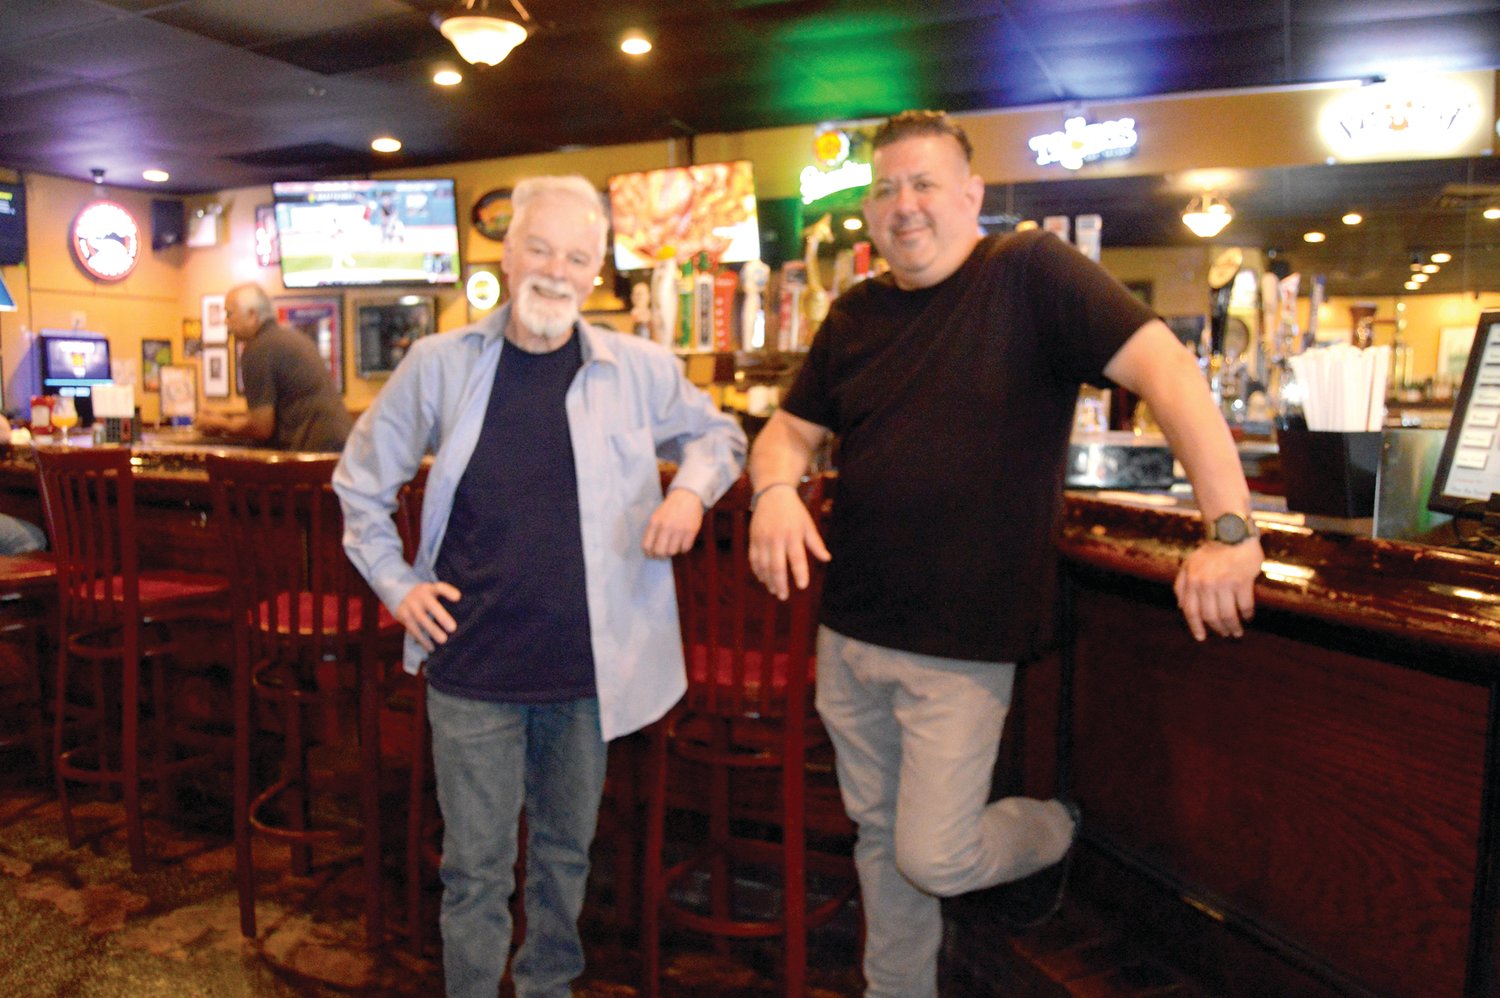 Chris Staub, left, owns the Blue Dog Family Tavern in New Britain with his wife Teri (not shown). At right is manager Rob Hyde.